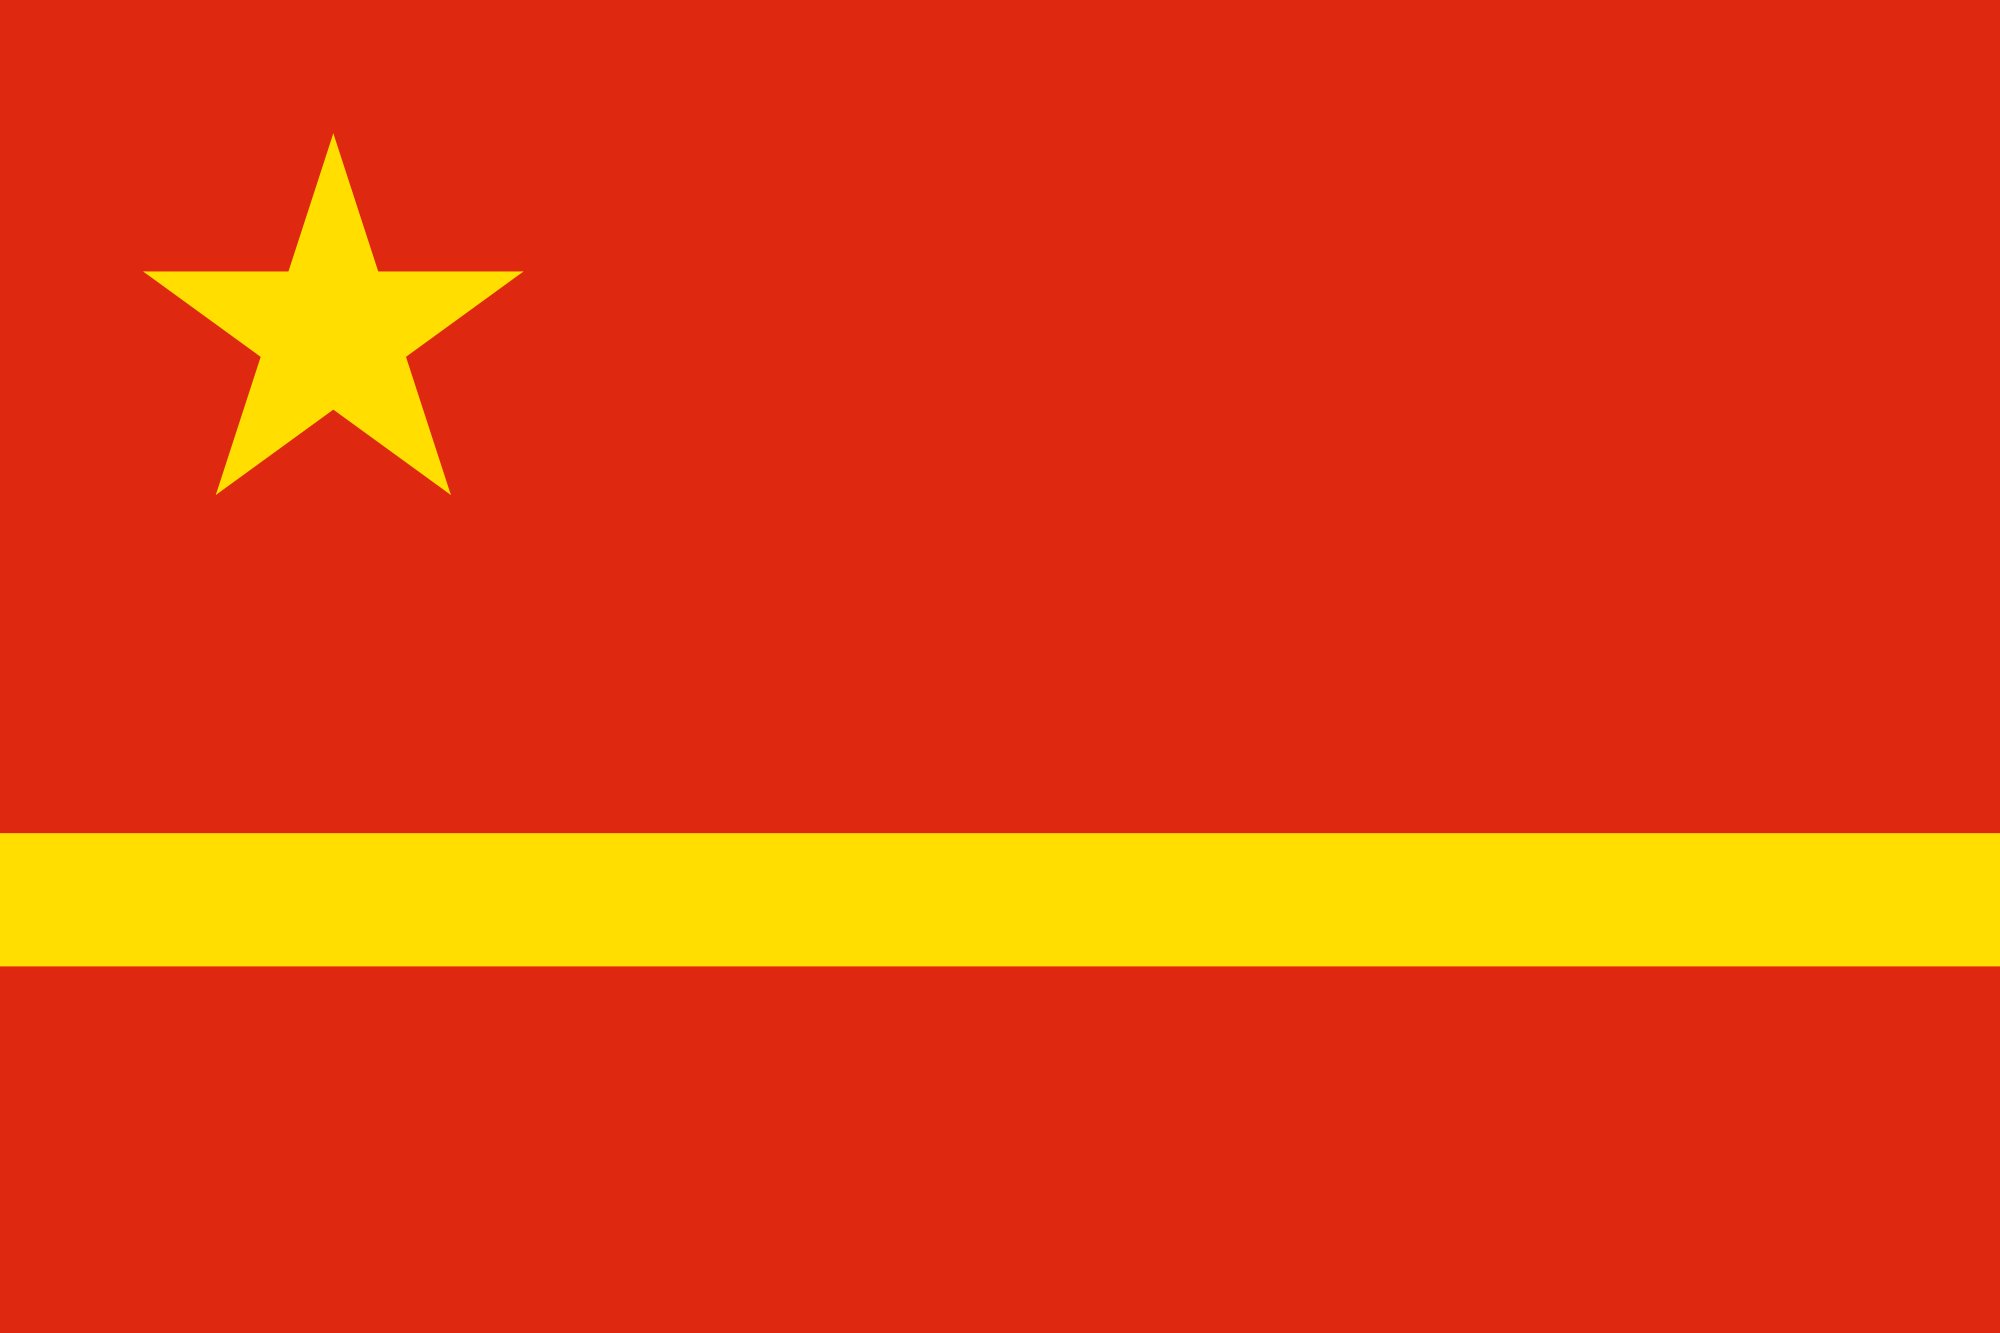 Flag Of China Backgrounds, Compatible - PC, Mobile, Gadgets| 2000x1333 px